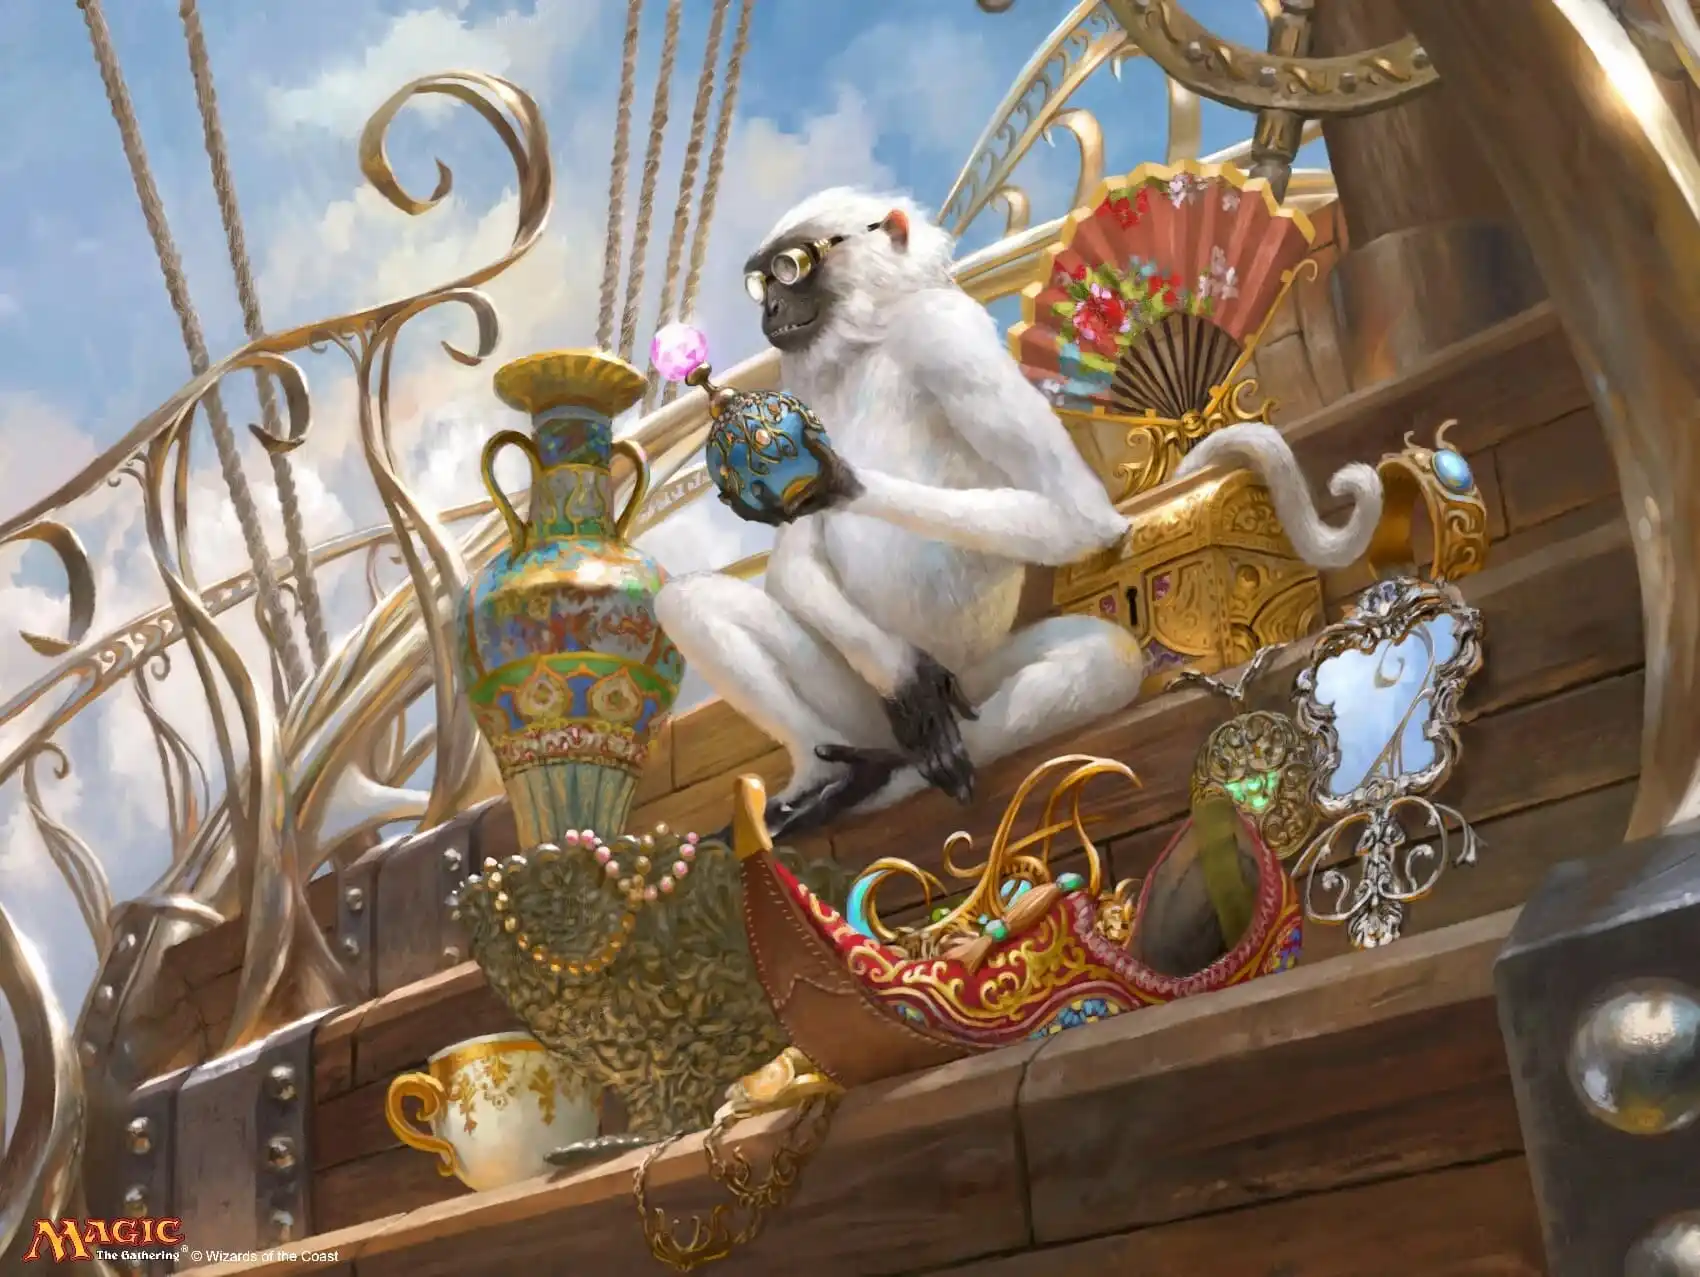 An image of a monkey holding treasure in a ship